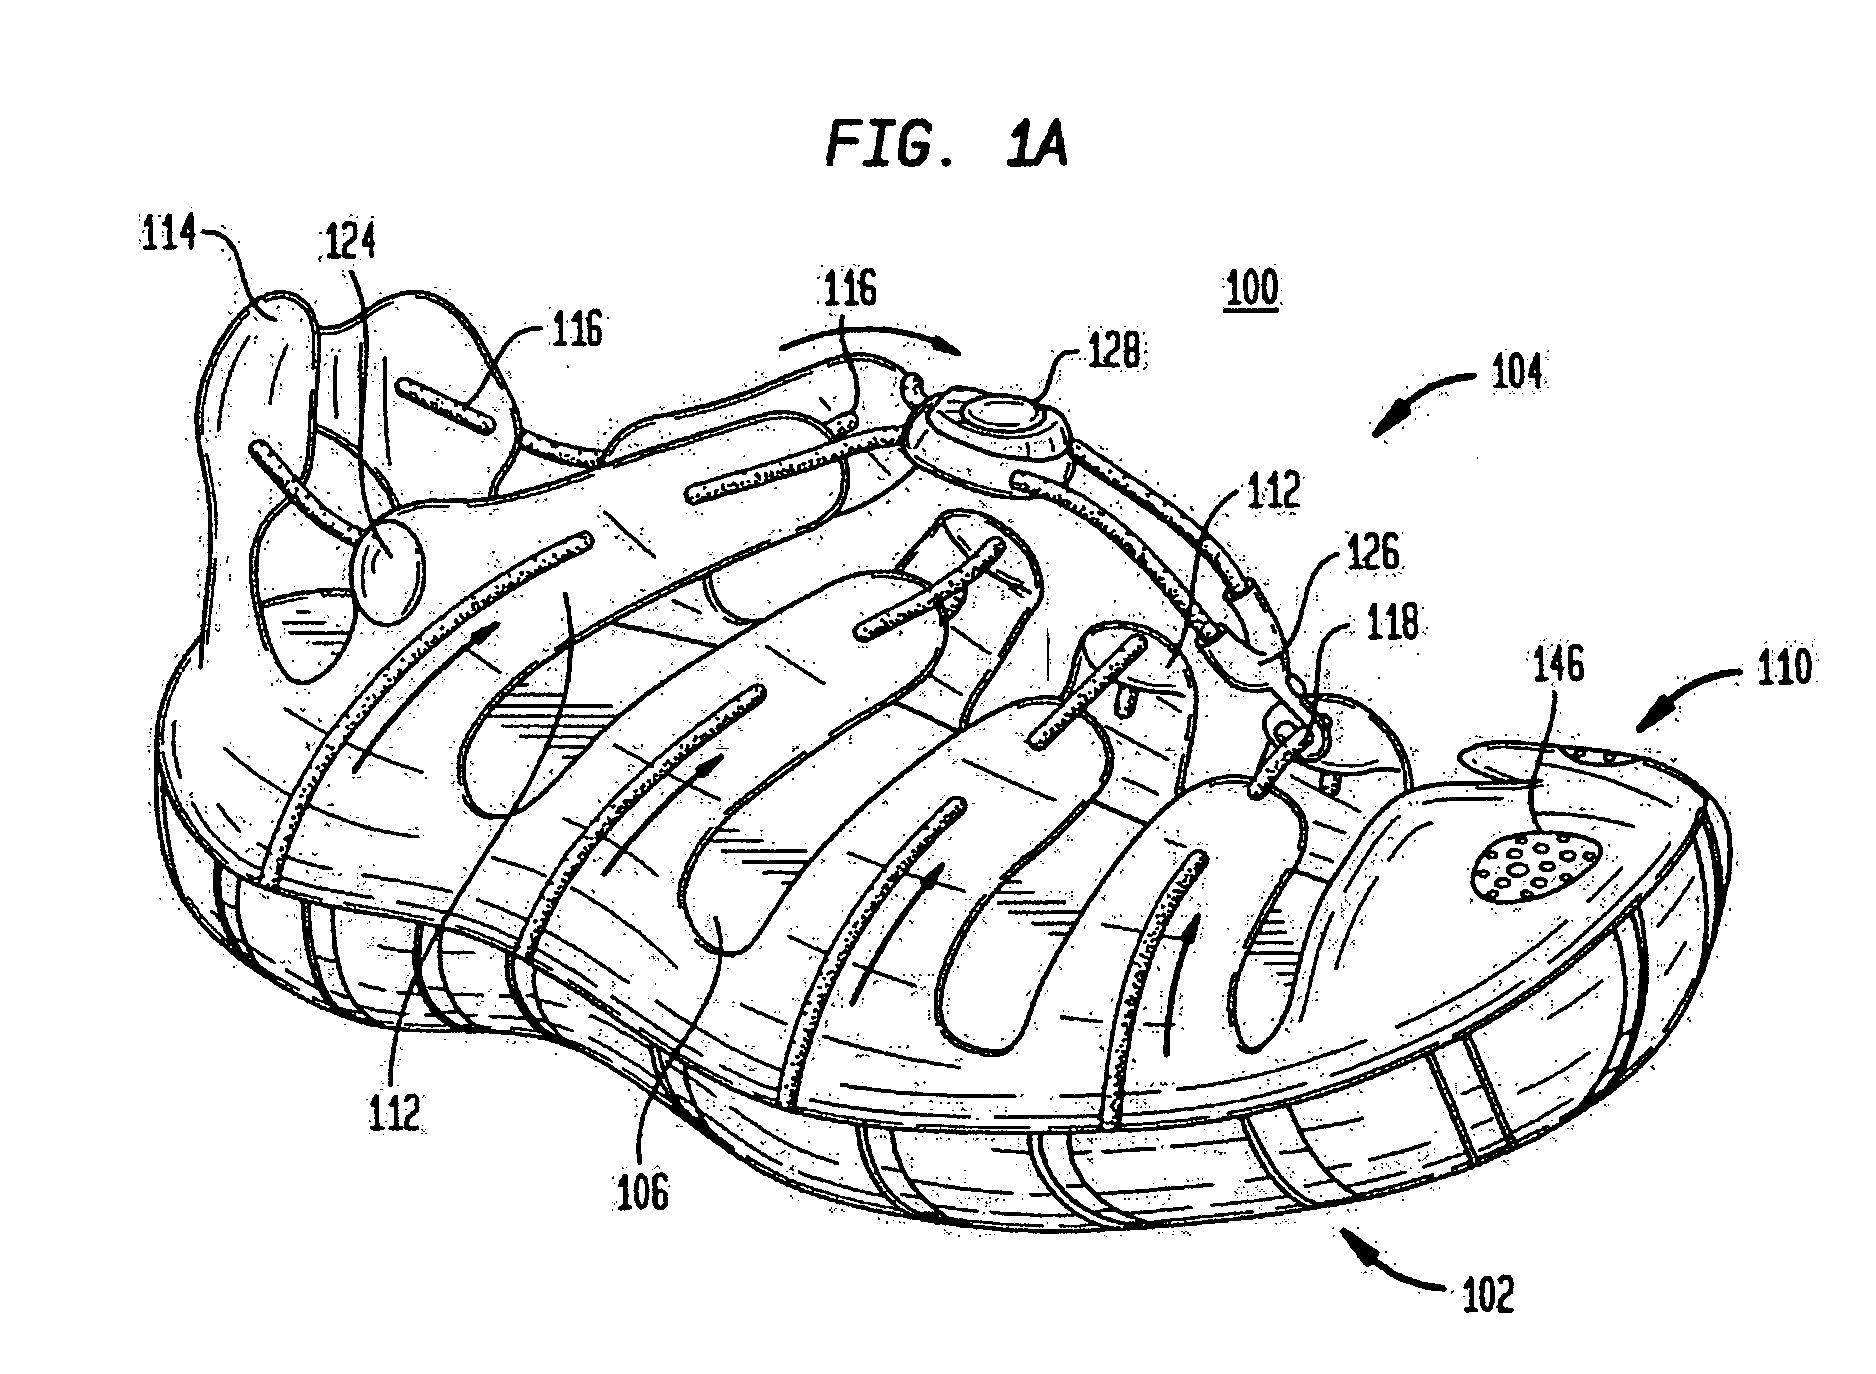 Shoe with anatomical protection